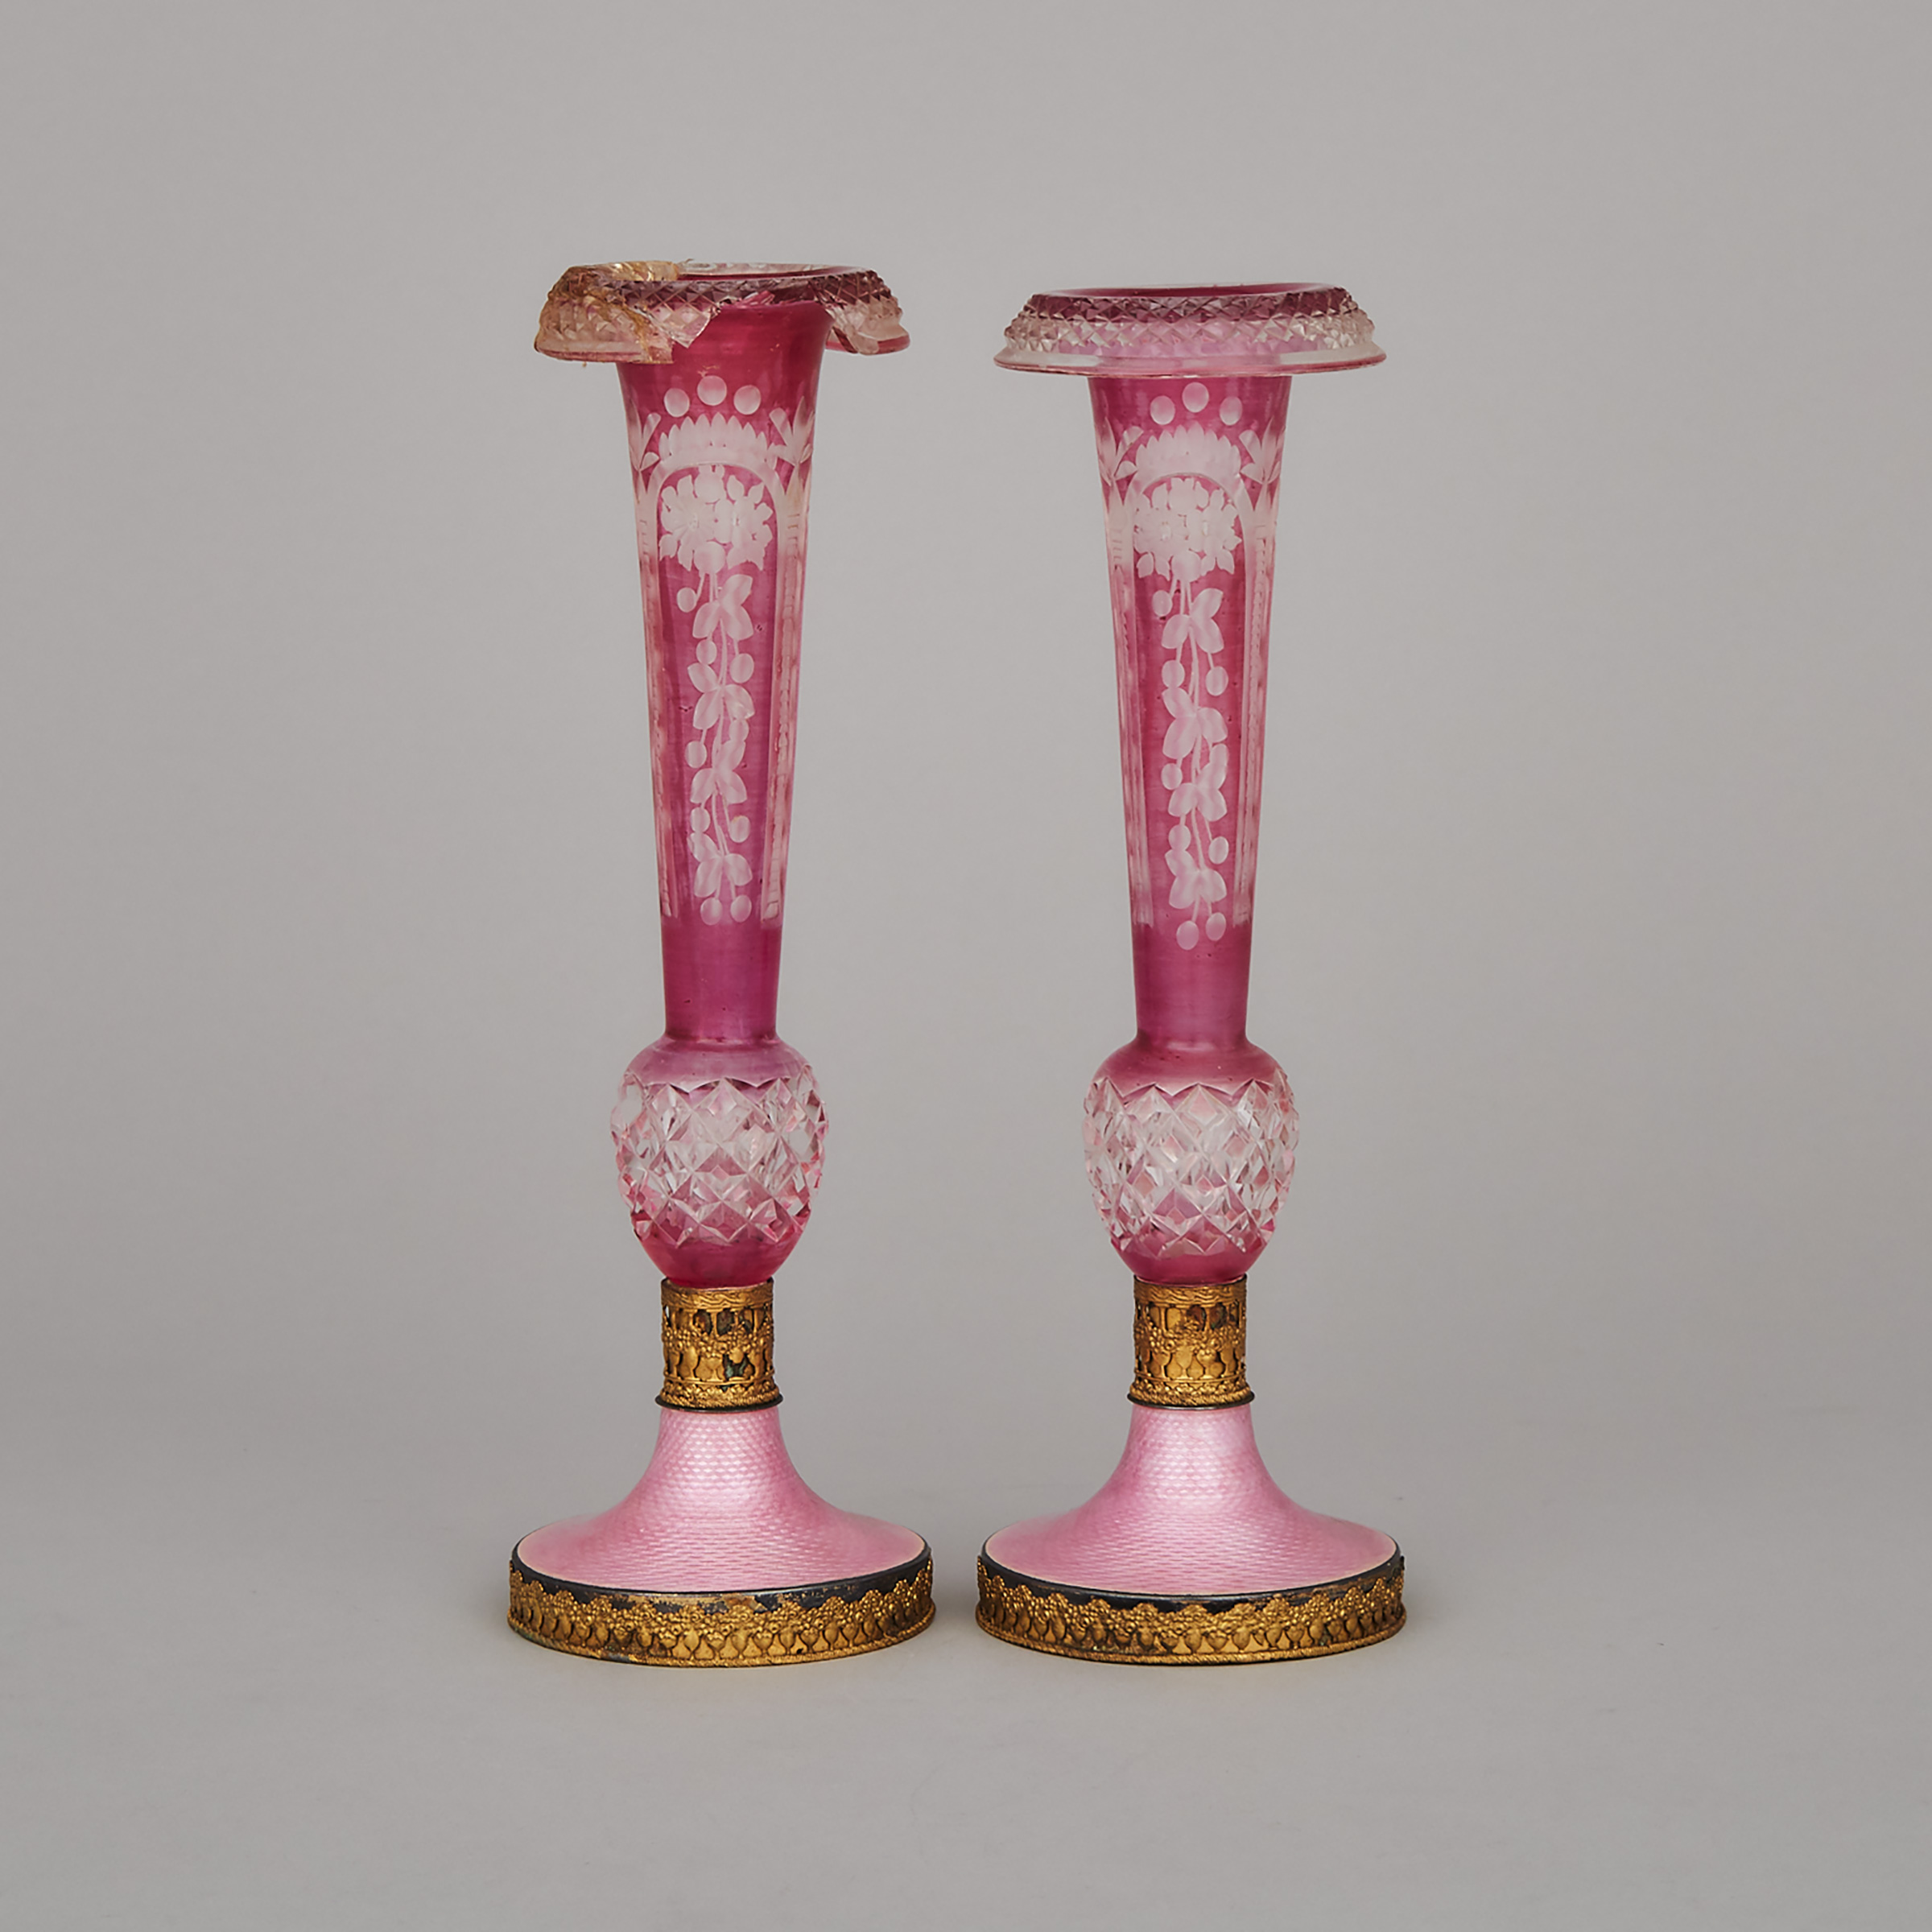 Pair of Continental Red Overlaid and Cut Glass, Gilt Brass and Guilloche Enameled Vases, c.1900